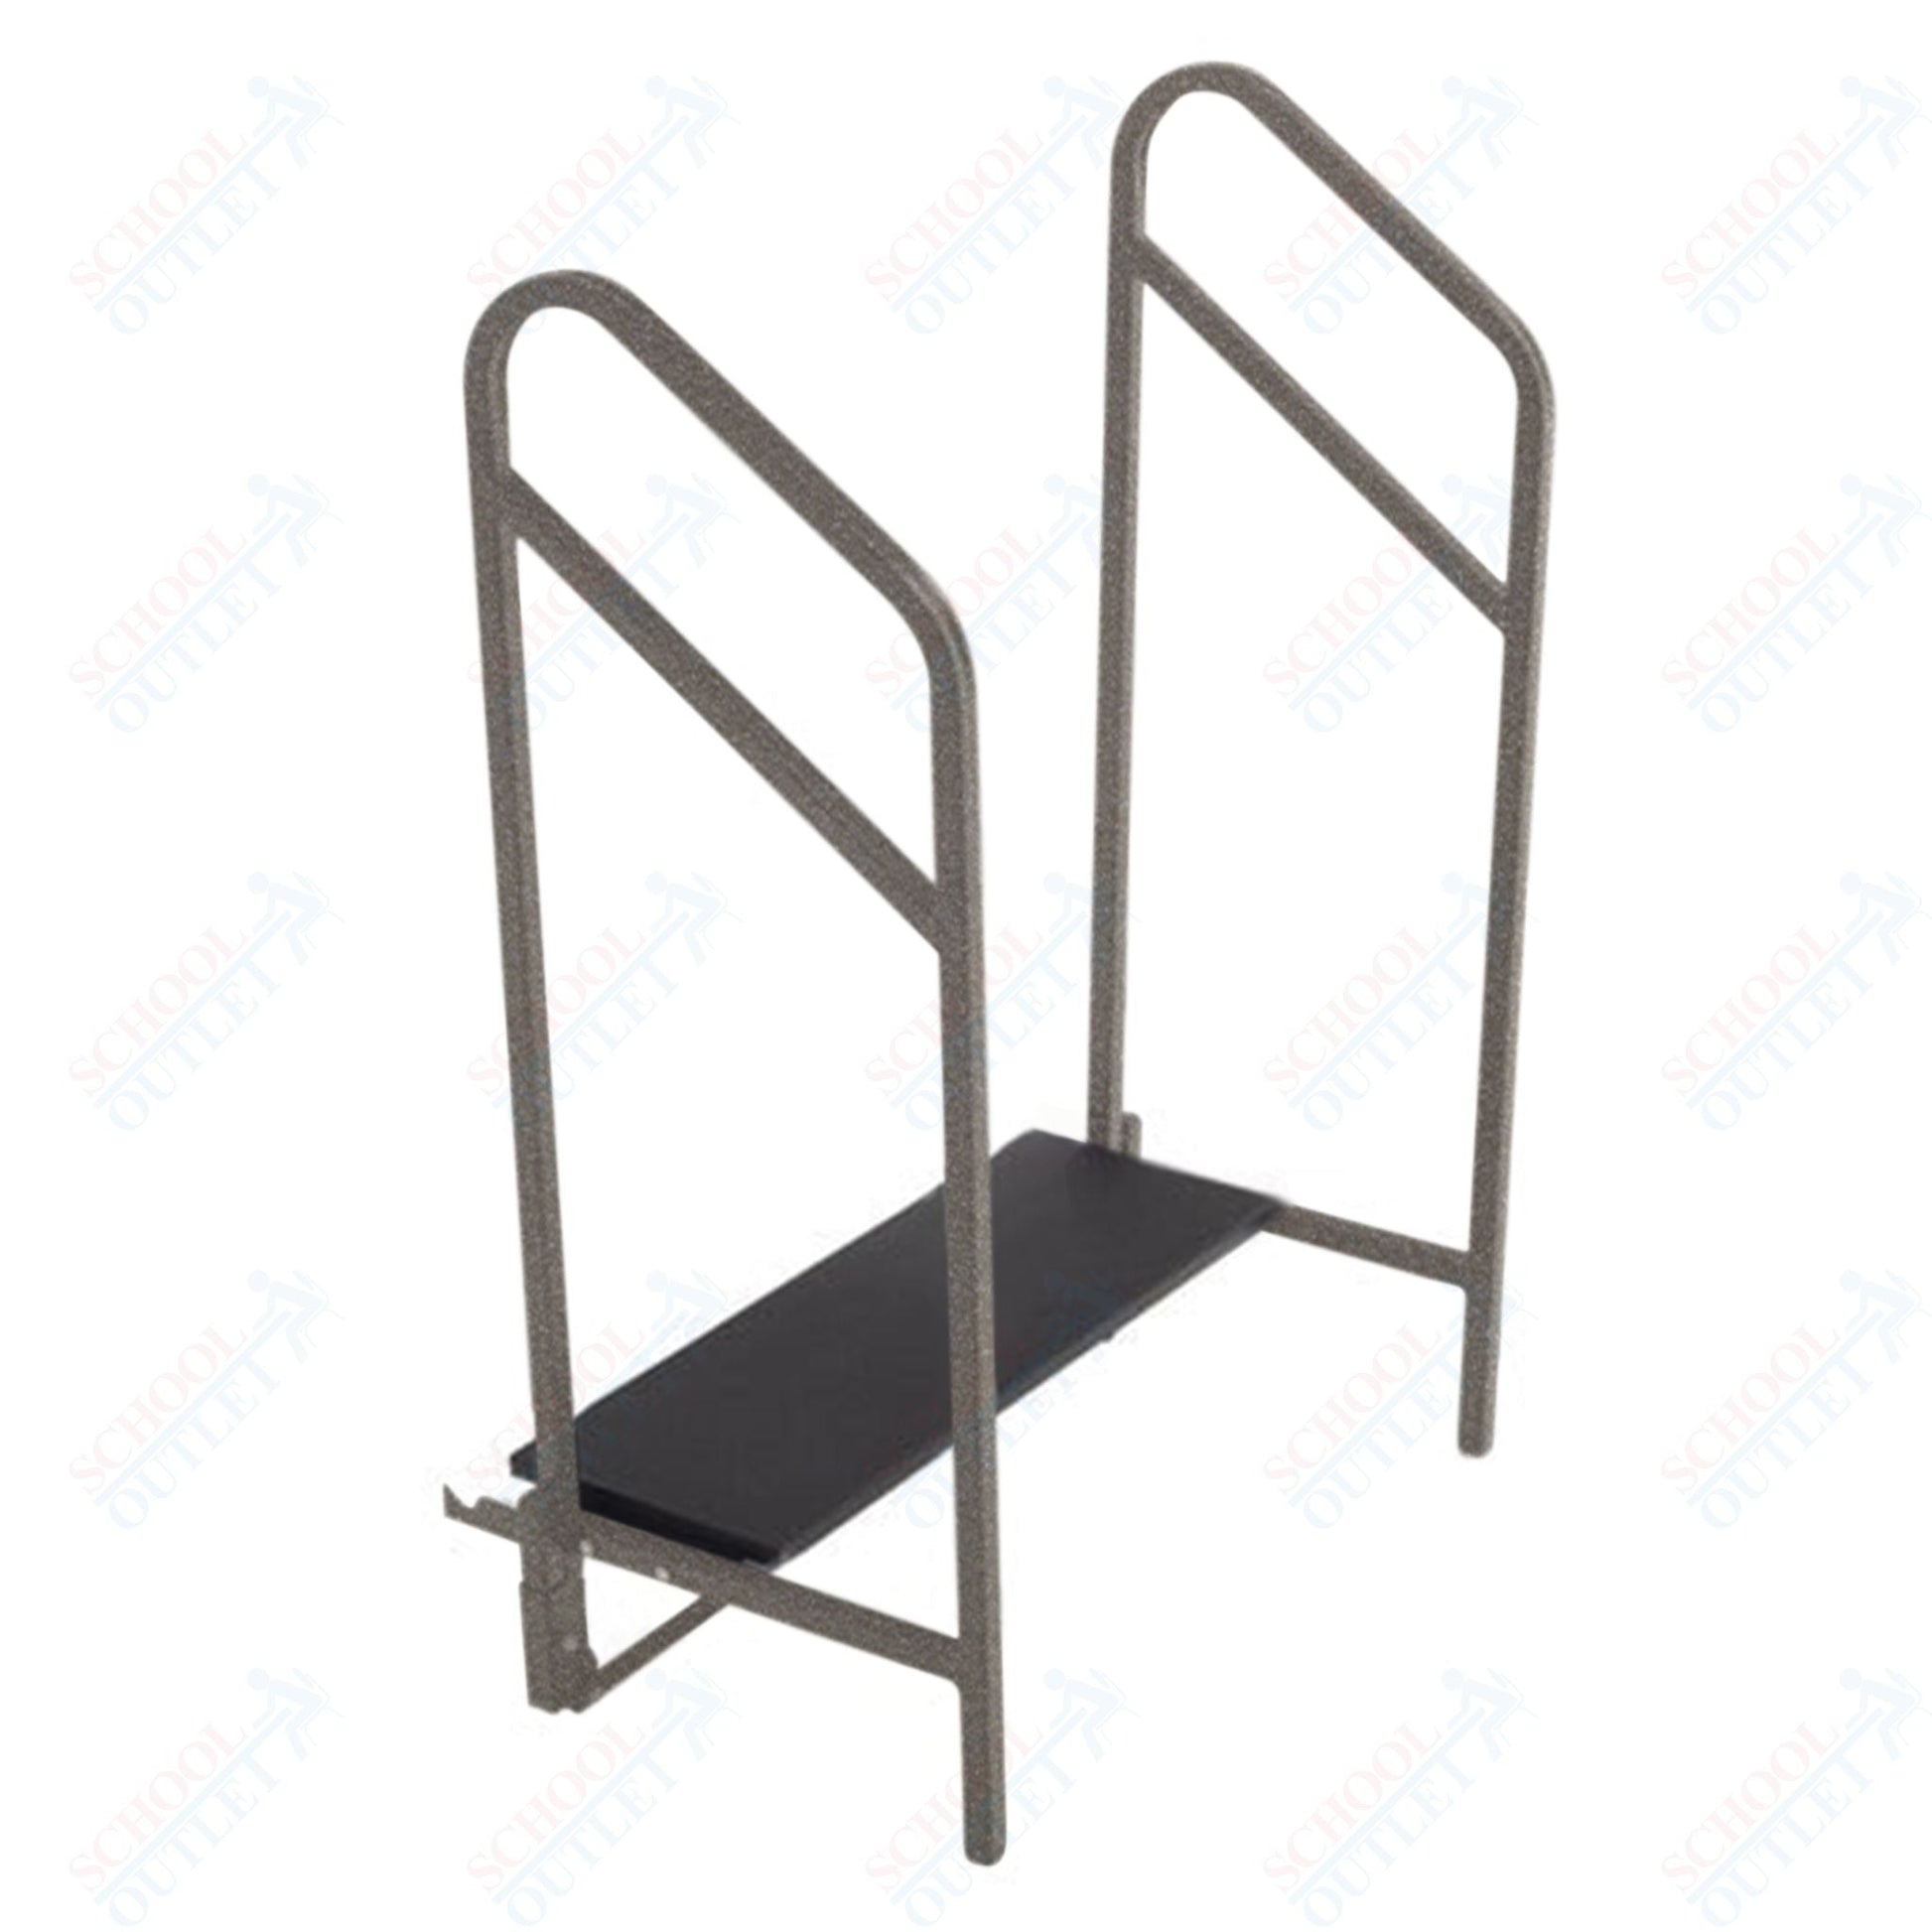 AmTab One Step with Handrails (8"H Step) - 36"W x 15"L x 47"H (AmTab AMT - STP1) - SchoolOutlet